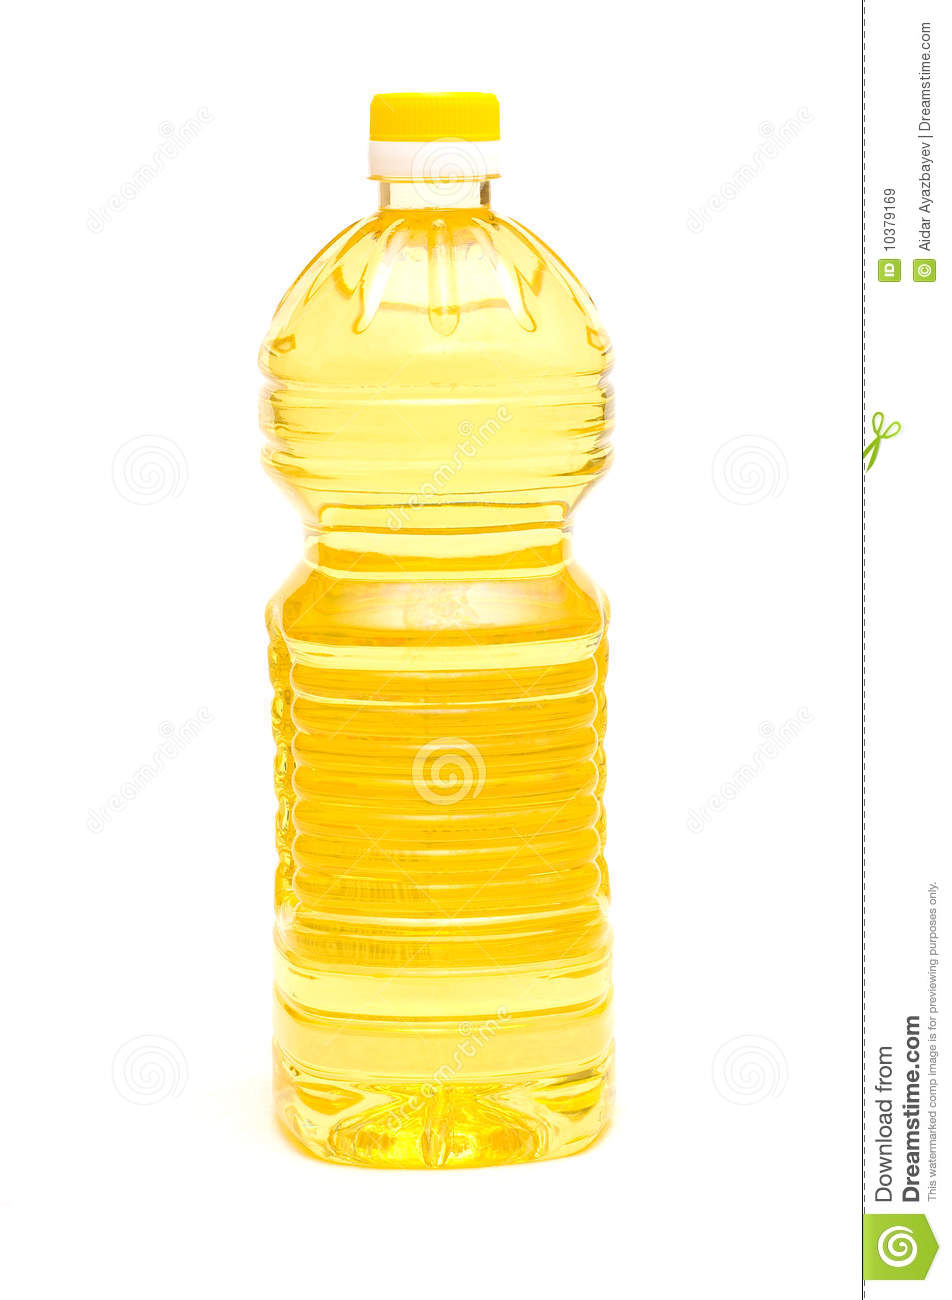 Cooking Oil Royalty Free Stock Images   Image  10379169